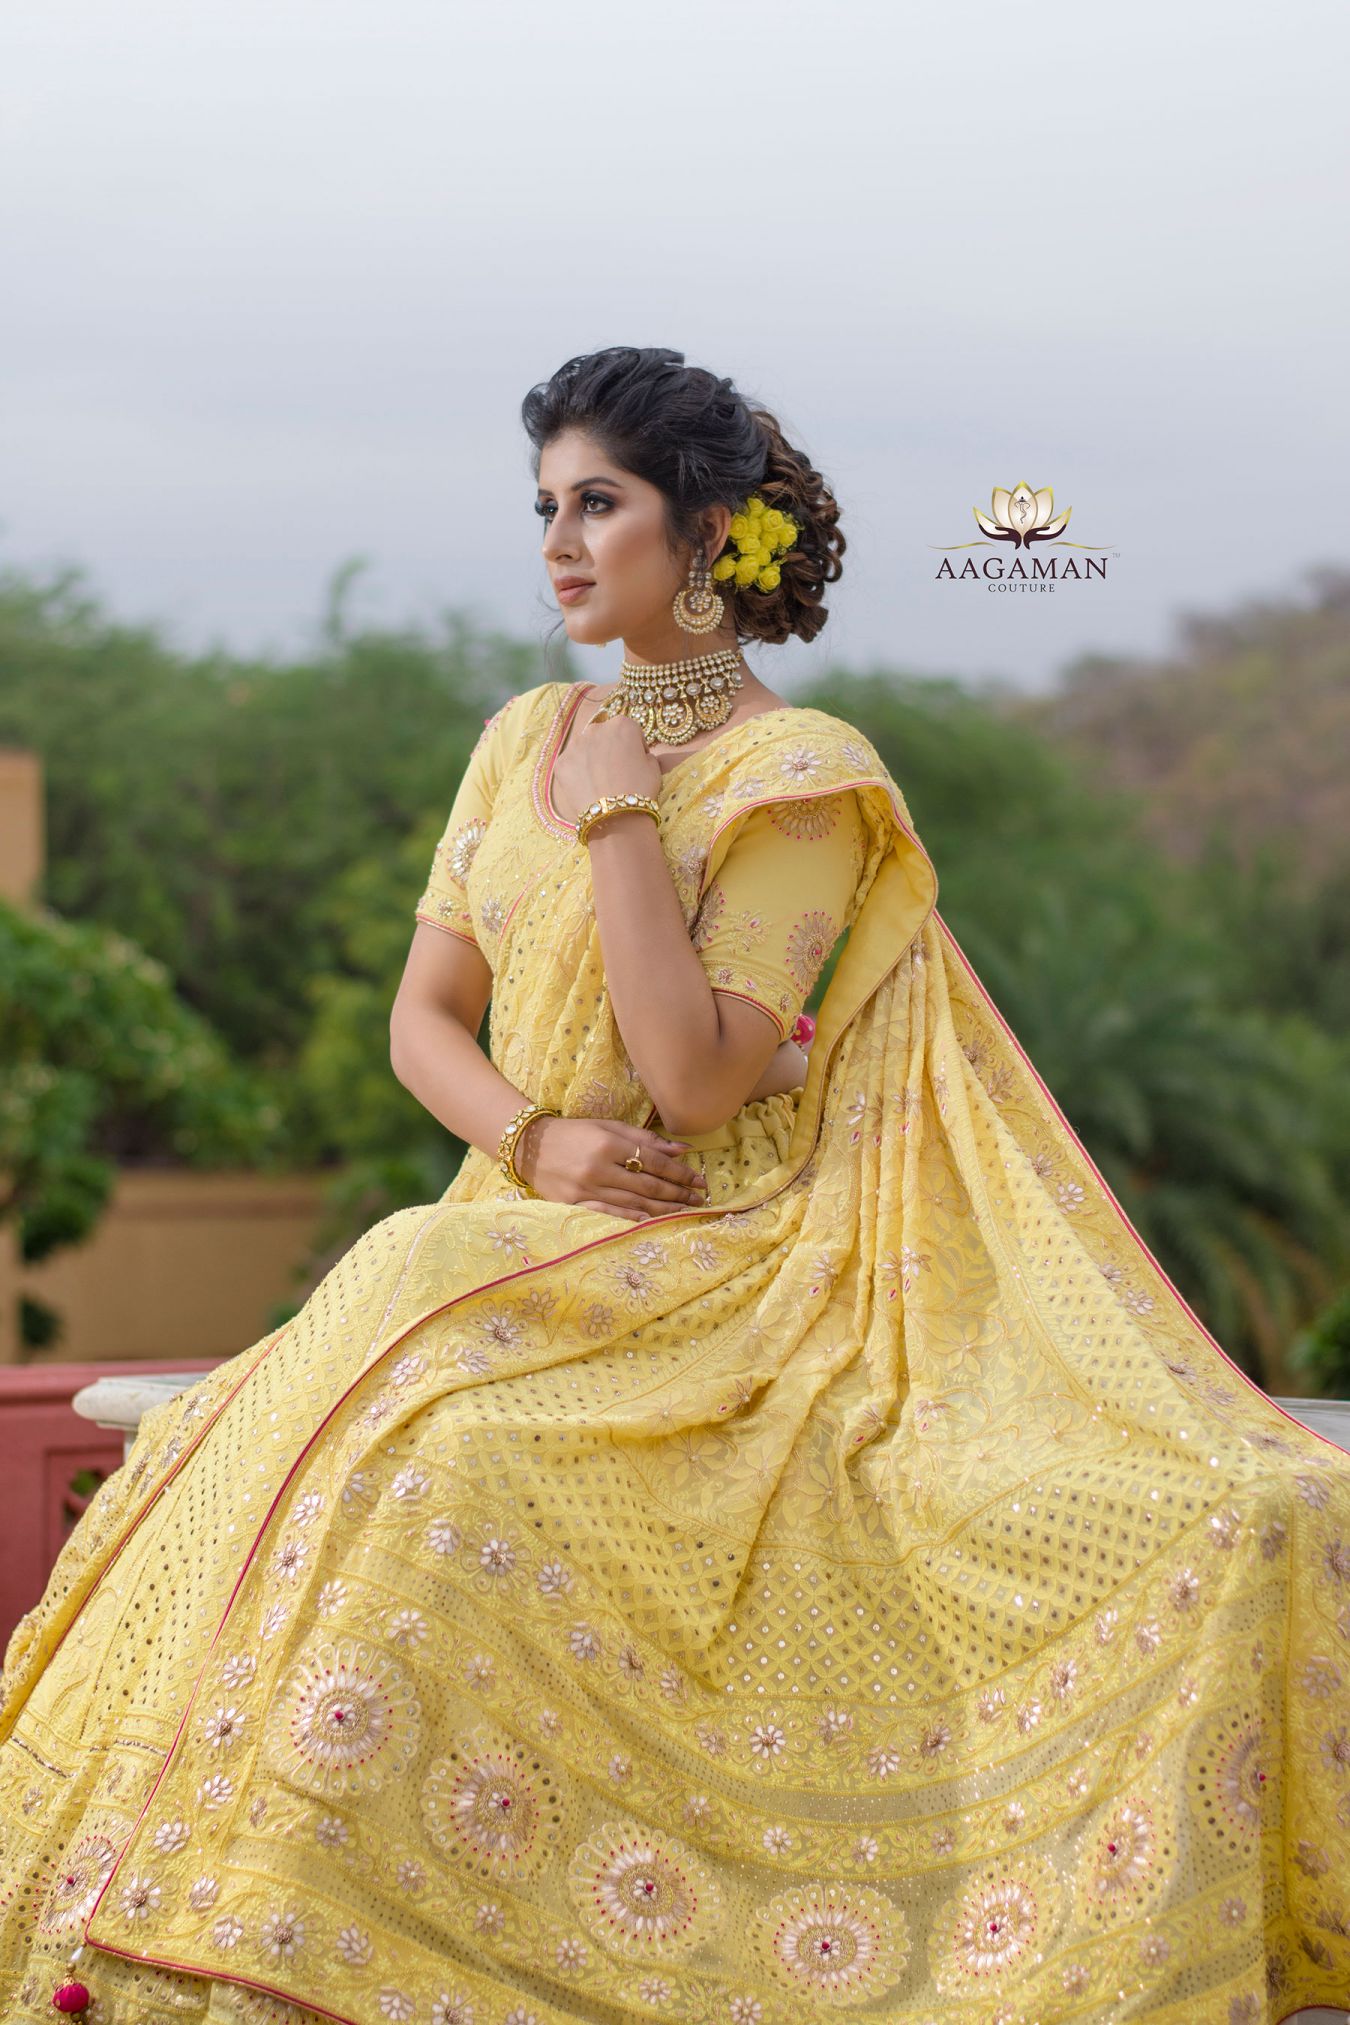 Every Mukaish and Zardozi Piece Come Together to Create this Breathtaking Royal Bridal Handcrafted Chikan Lehenga in Vivid Romantic Yellow